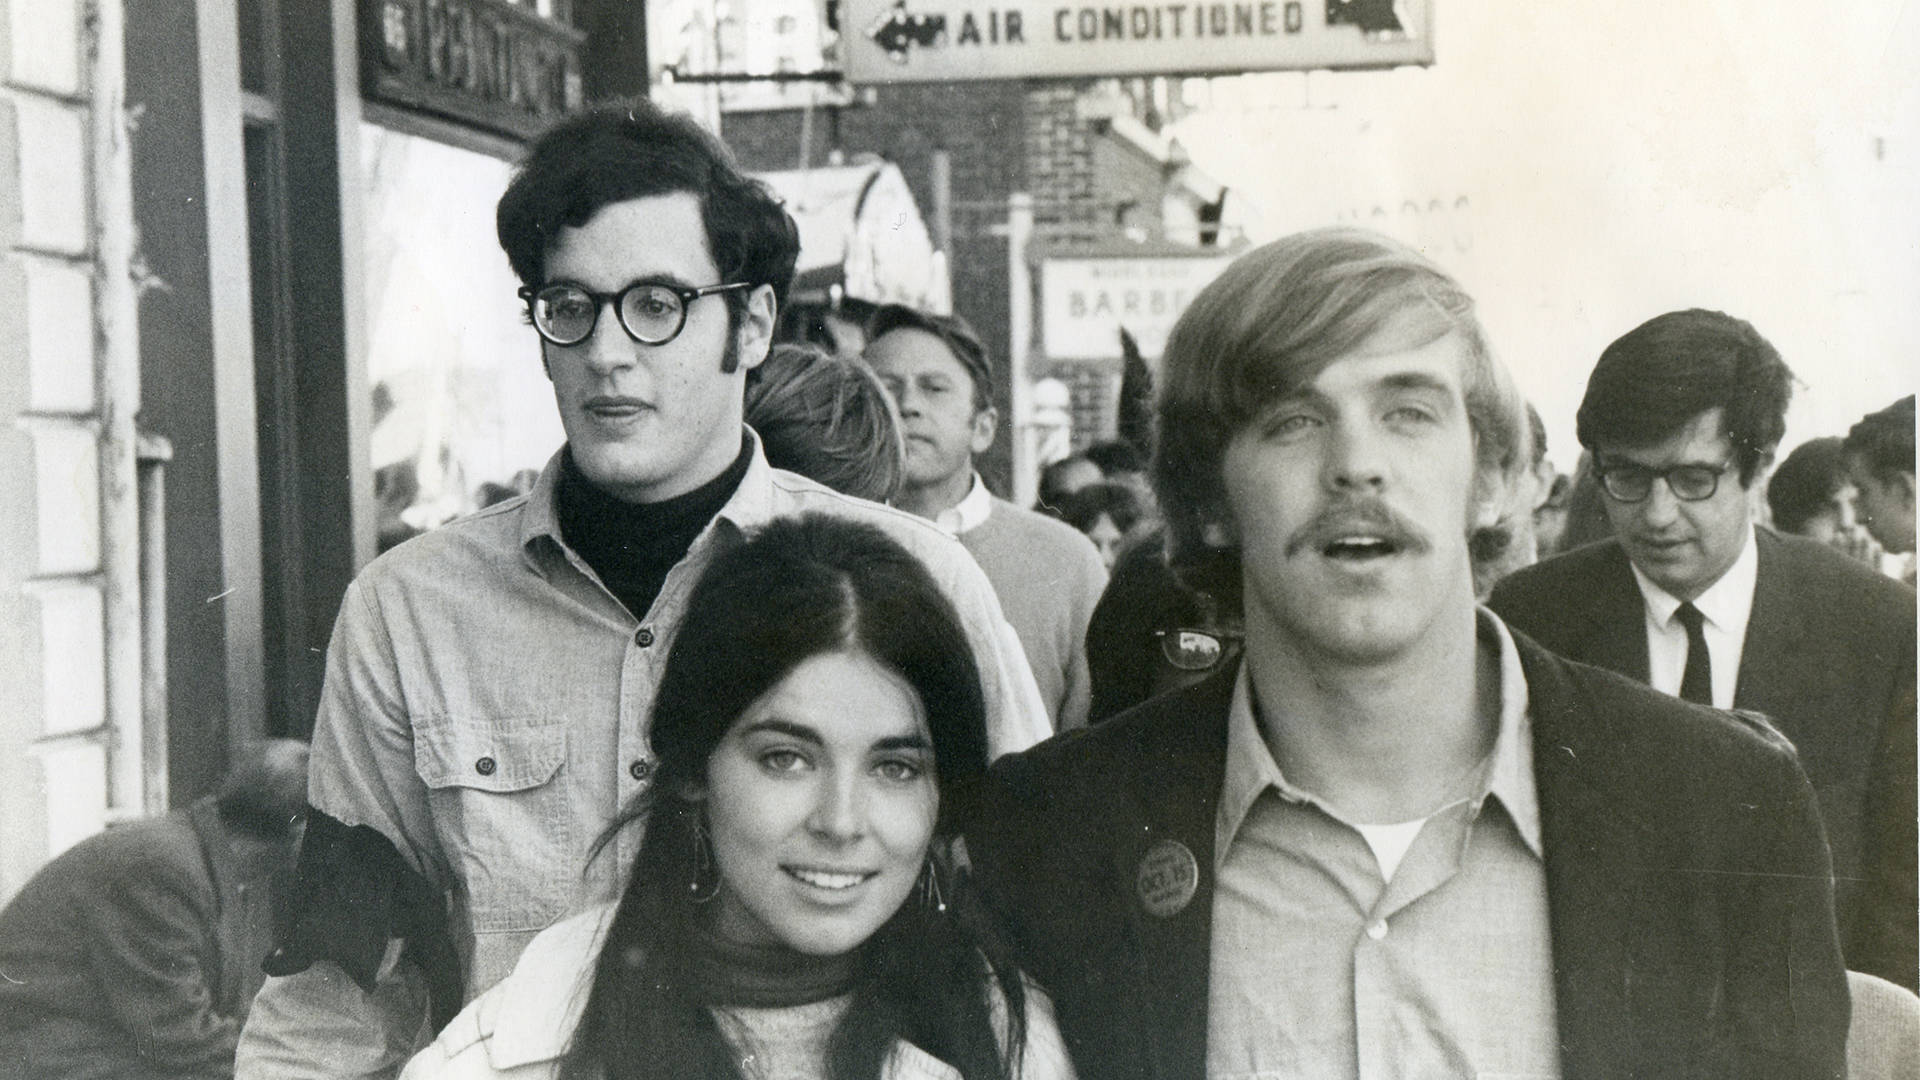 Stephen Talbot leading an anti-war march in Middletown, Conn. on October 15, 1969, with his then girlfriend Susan Heldfond -- as part of the National Moratorium Day Courtesy of Stephen Talbot